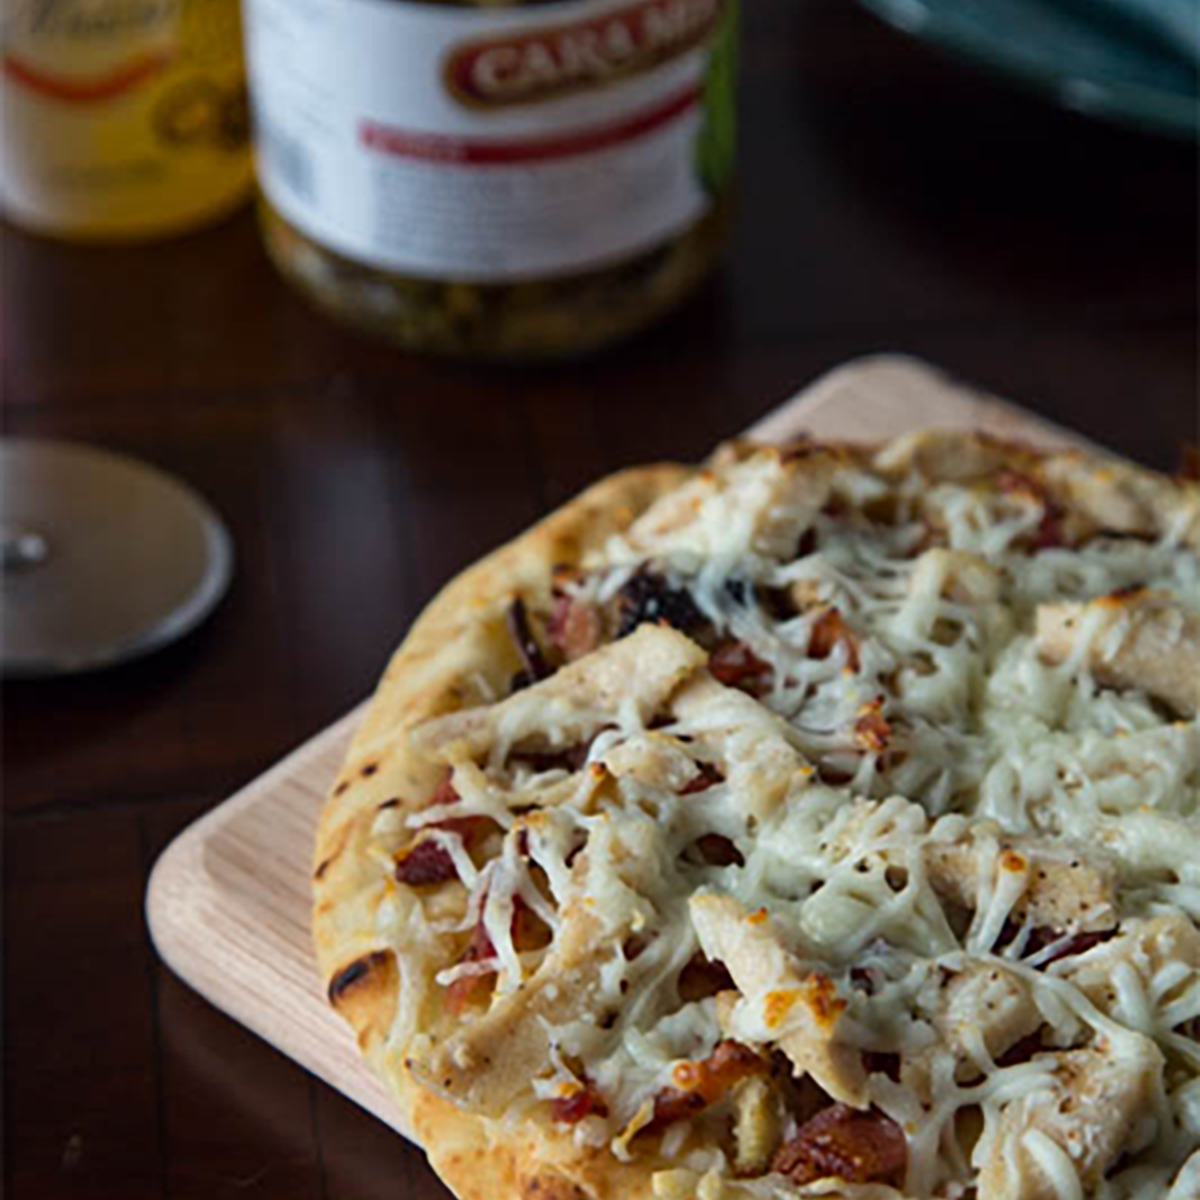 This quick and easy pizza contains naan bread topped with grilled artichokes, bacon, chicken, and cheese.  #STARFineFoods